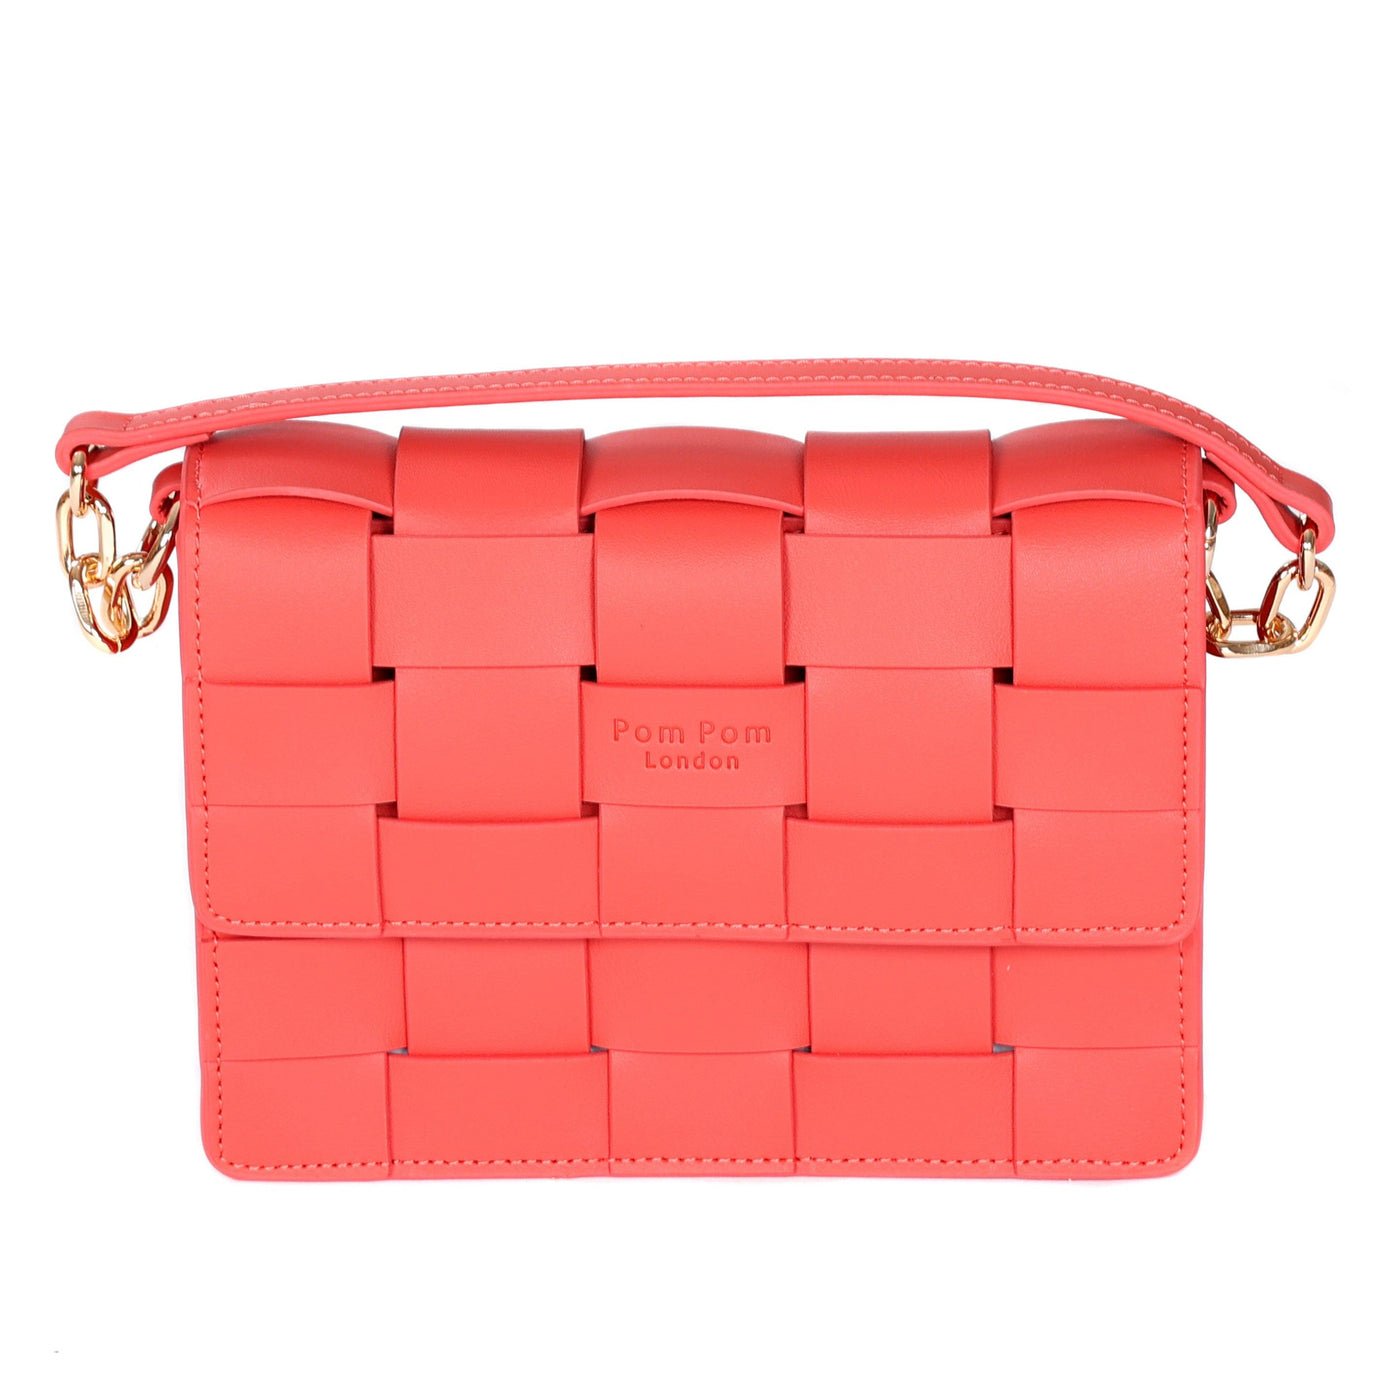 Deux Lux purse w/ woven details in coral  Black leather crossbody bag, Deux  lux, Pink crossbody bag